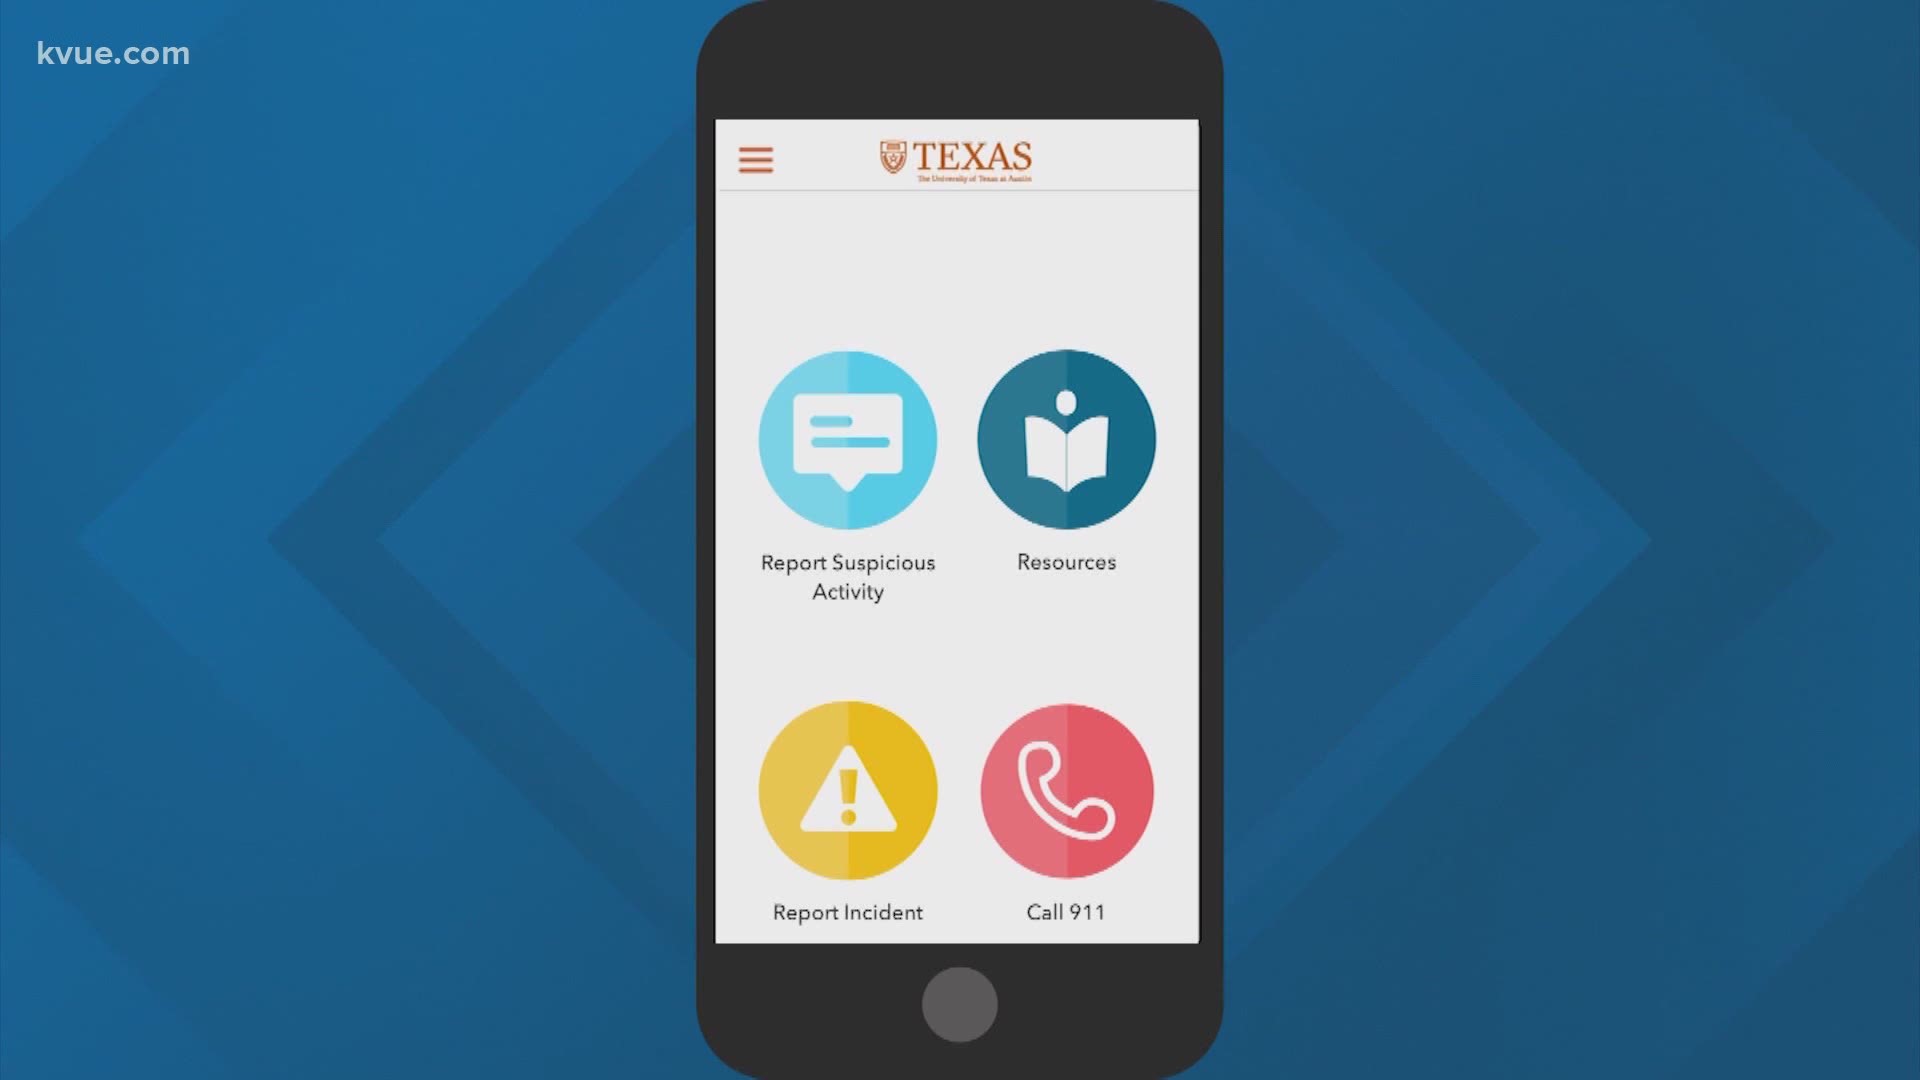 The app is called LiveSafe at UT Austin, and it's available to download in the Apple App Store and the Google Play Store.